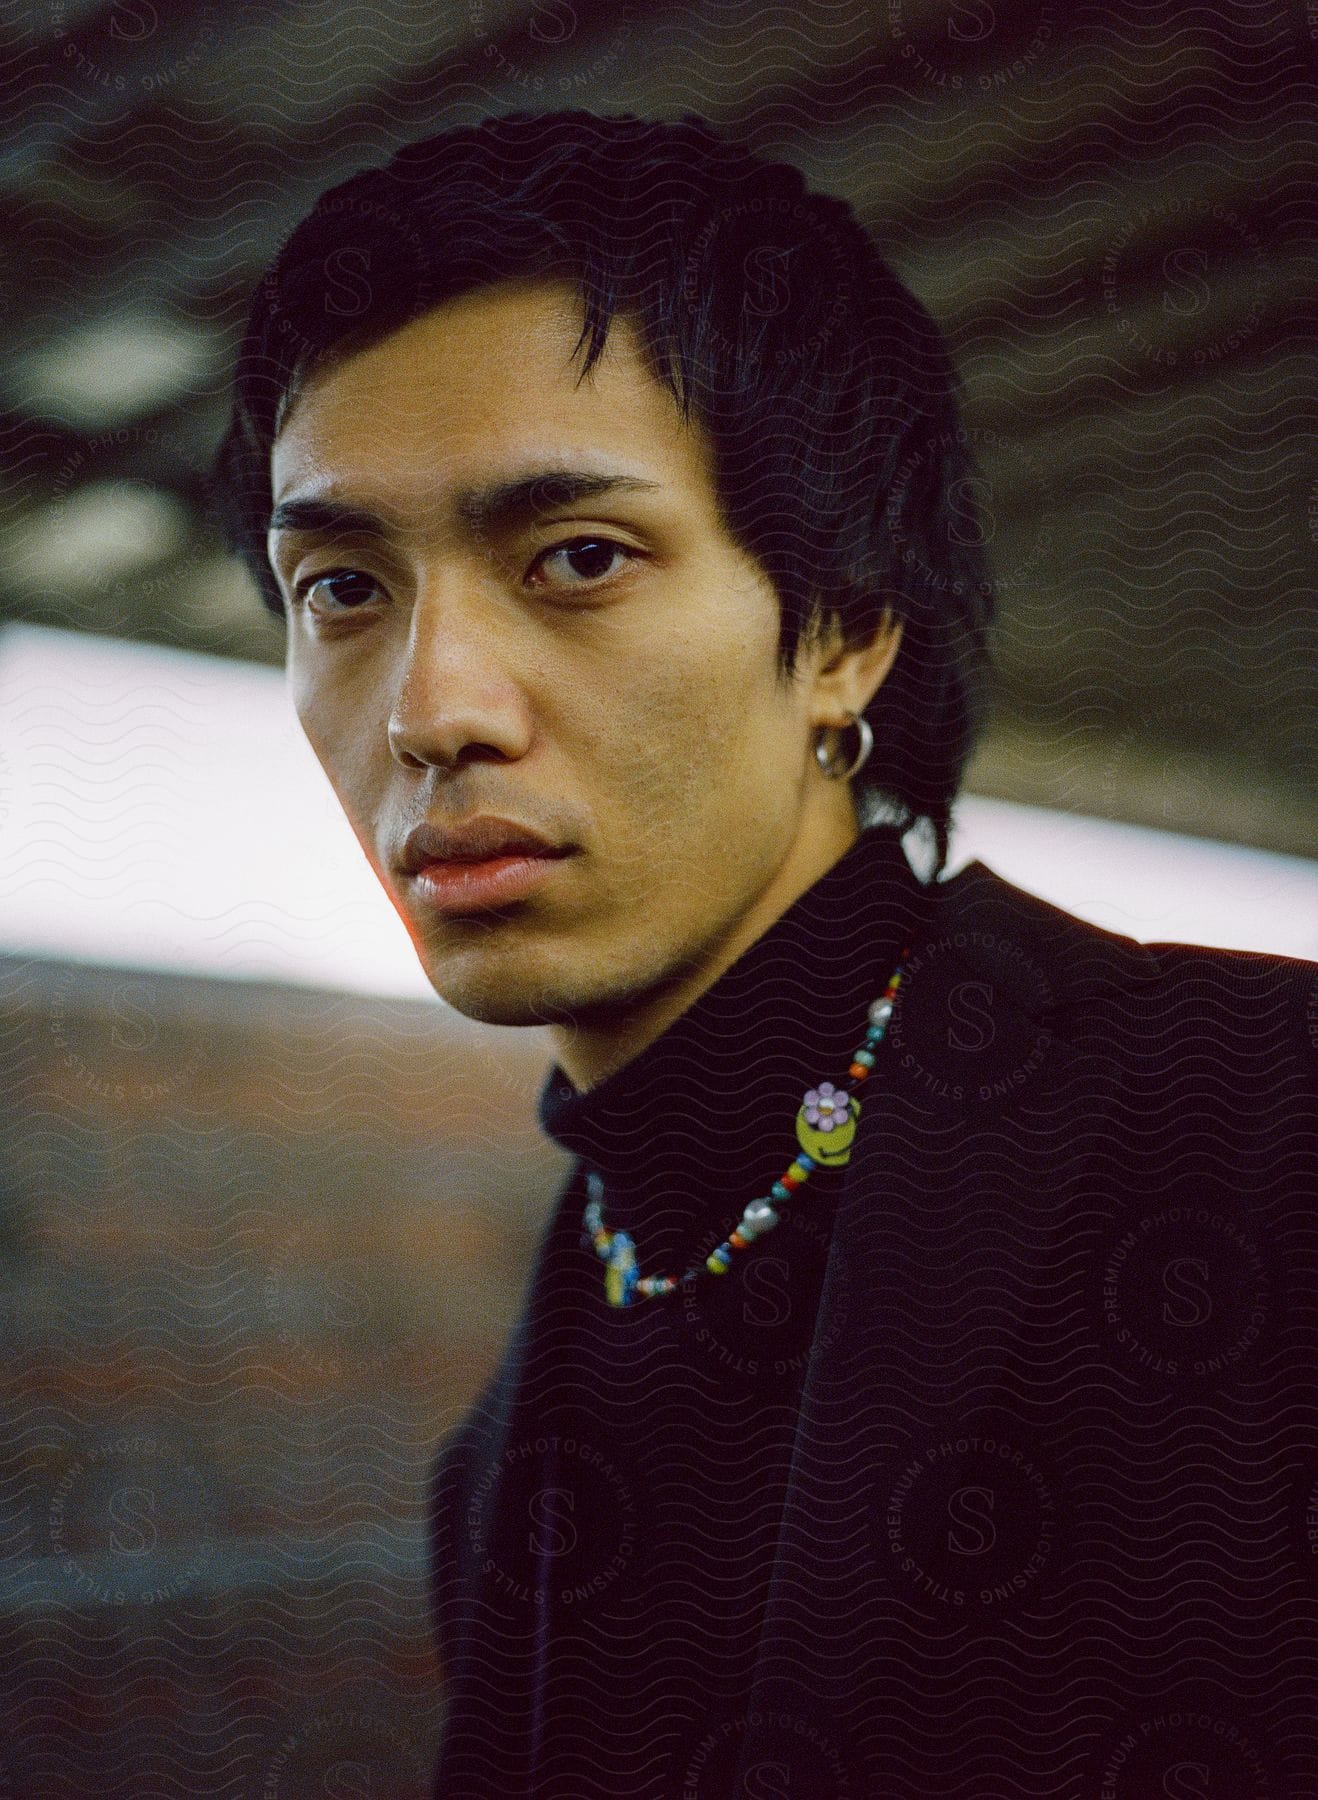 An Asian man wears a colorful necklace and black clothing.